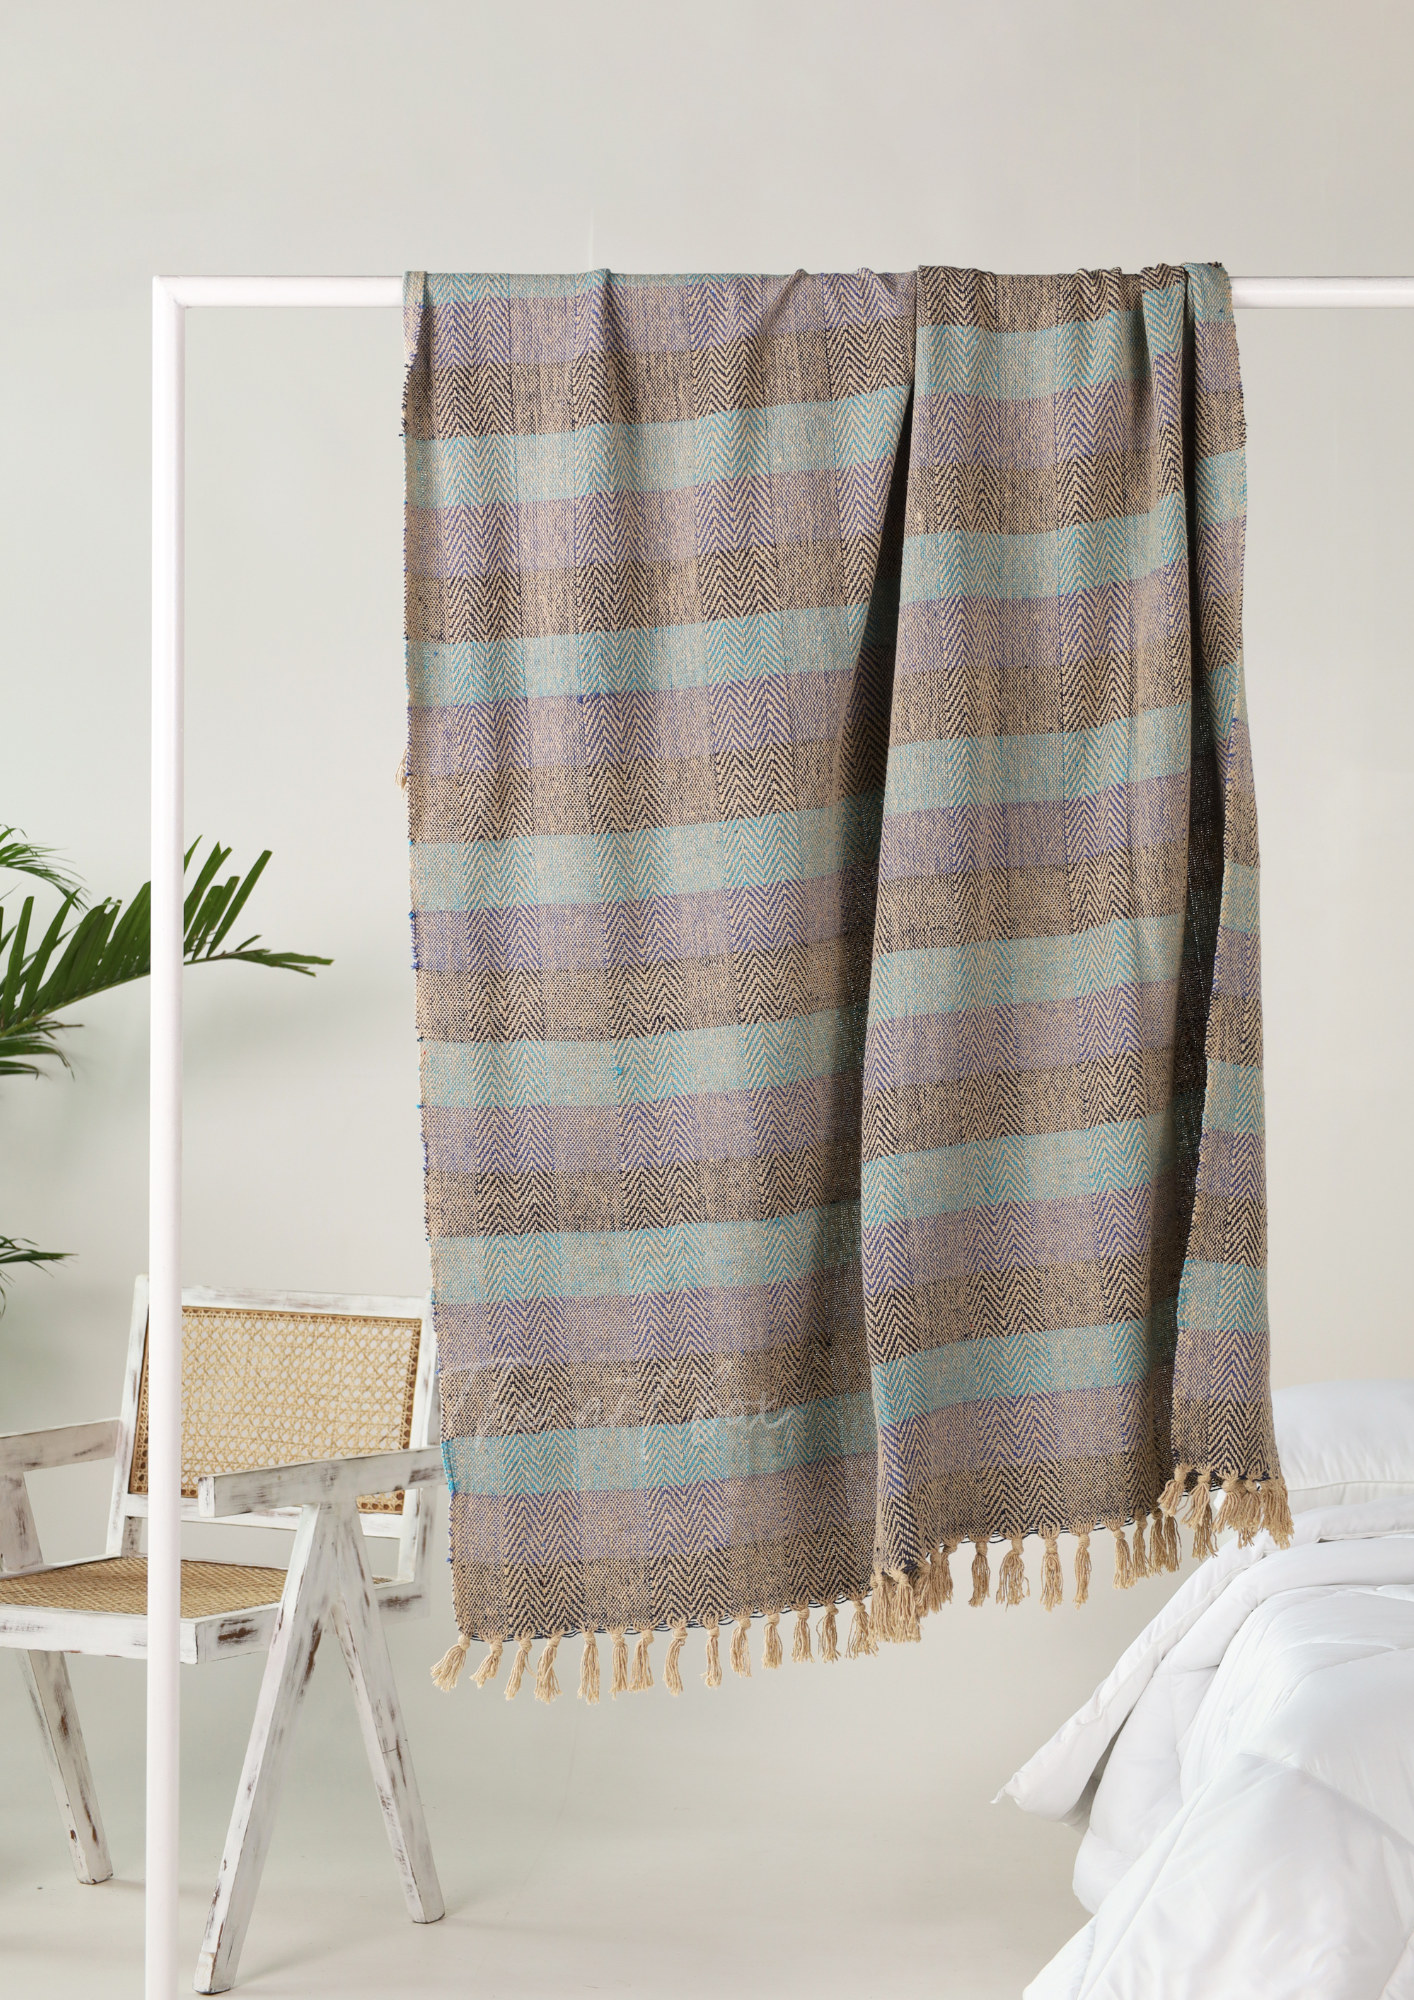 Mint & Grey Handwoven Throws